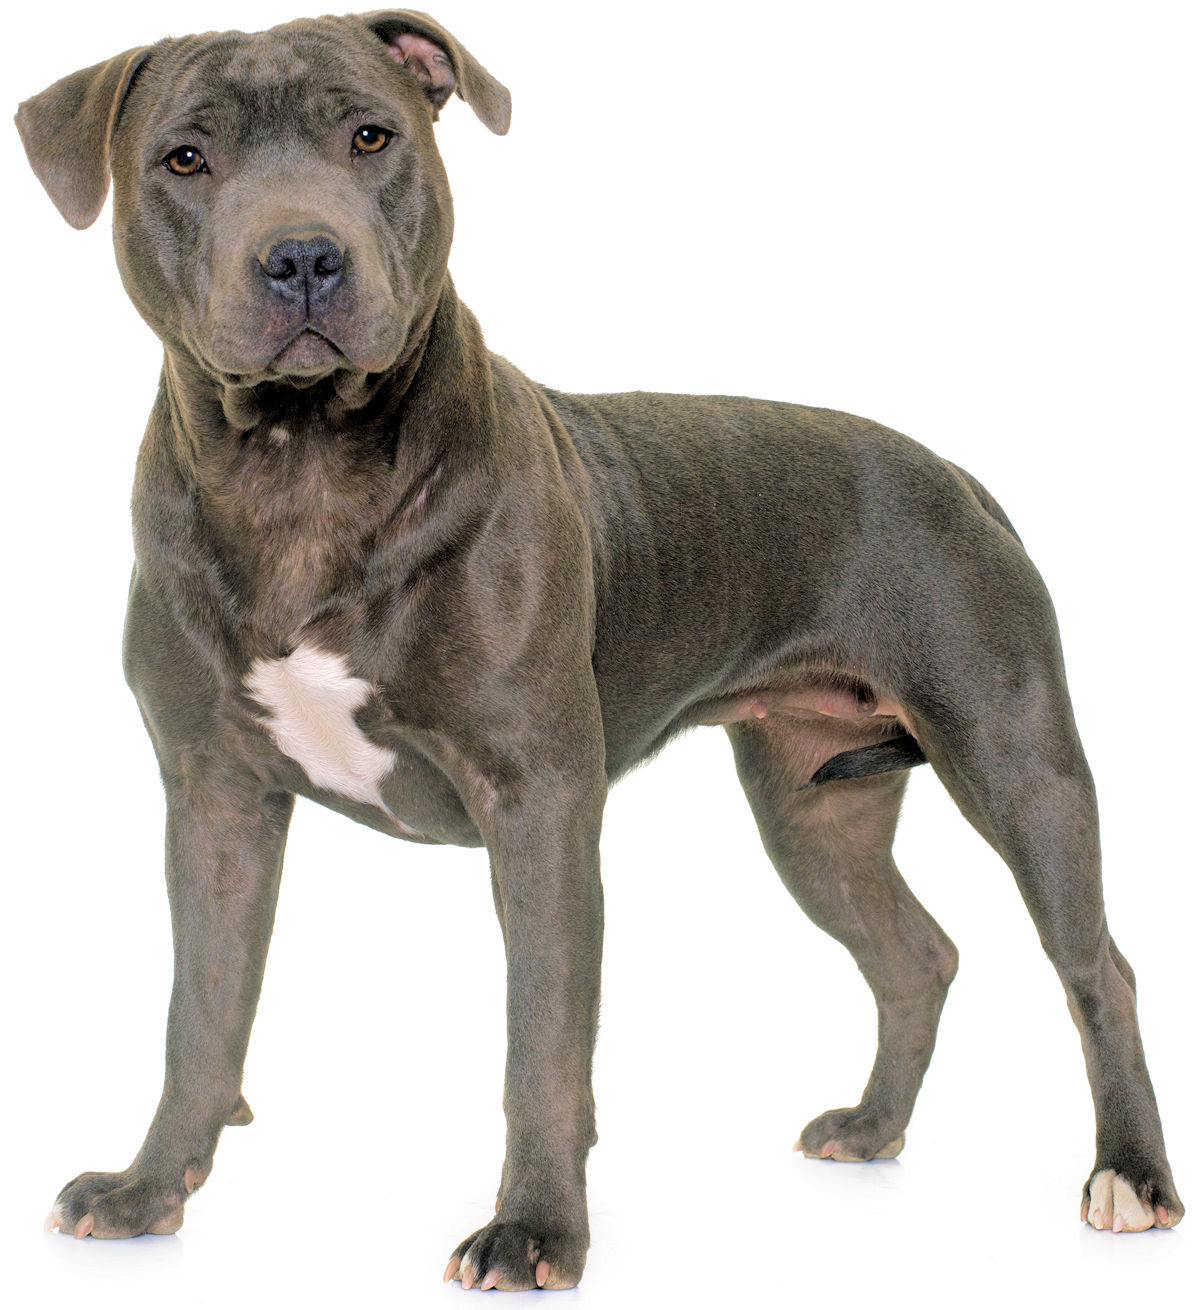 The Staffordshire Bull Terrier is a 